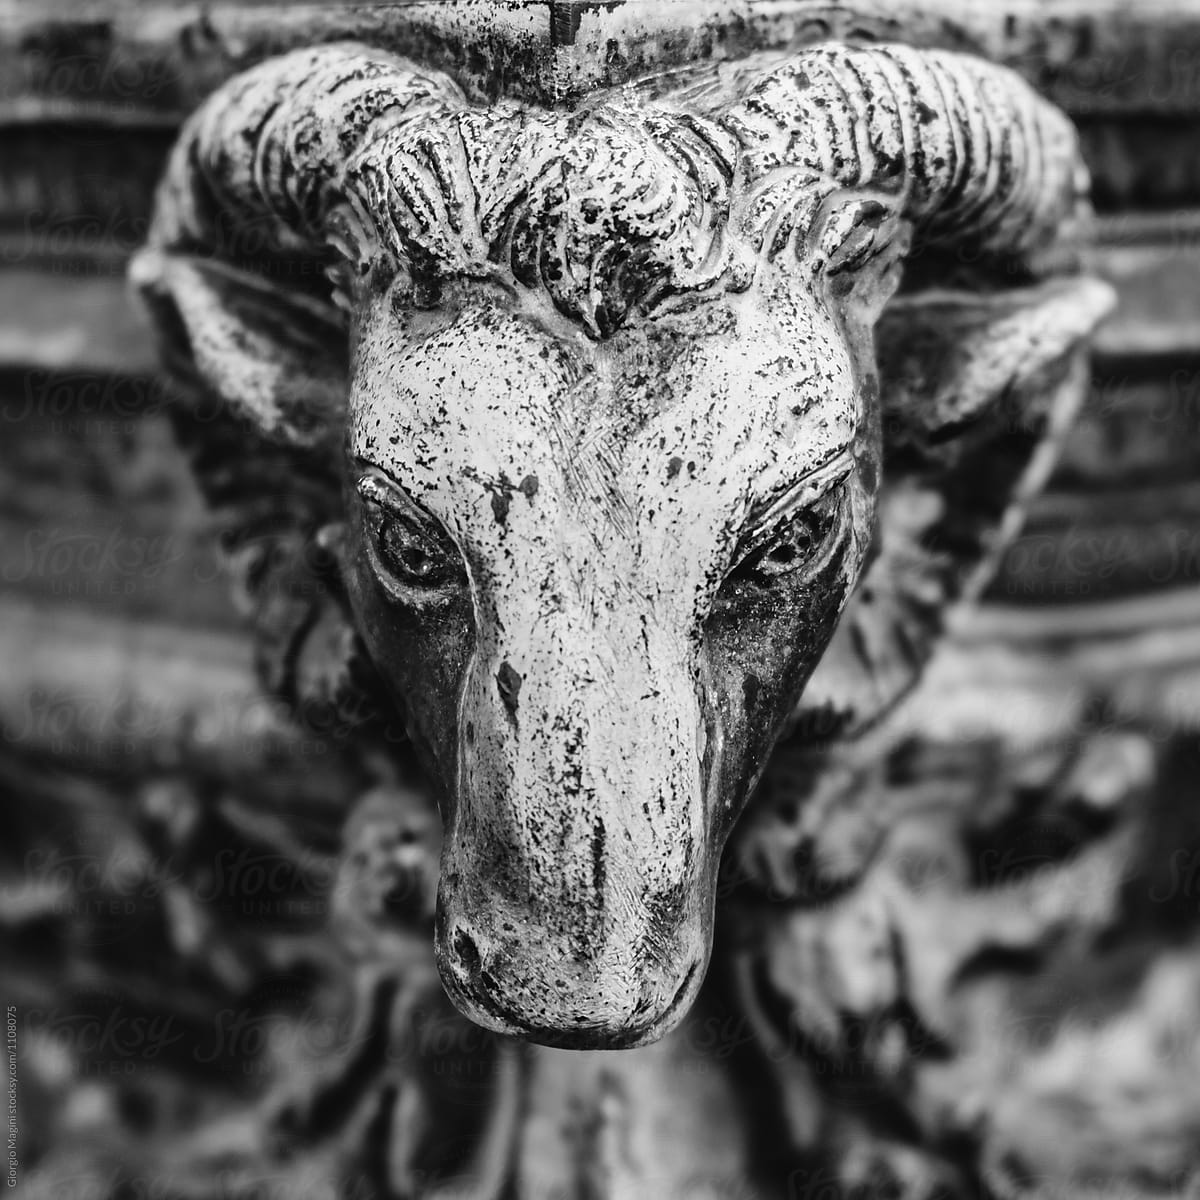 Copper Statue of a Goat\'s Head in an Old Cemetery